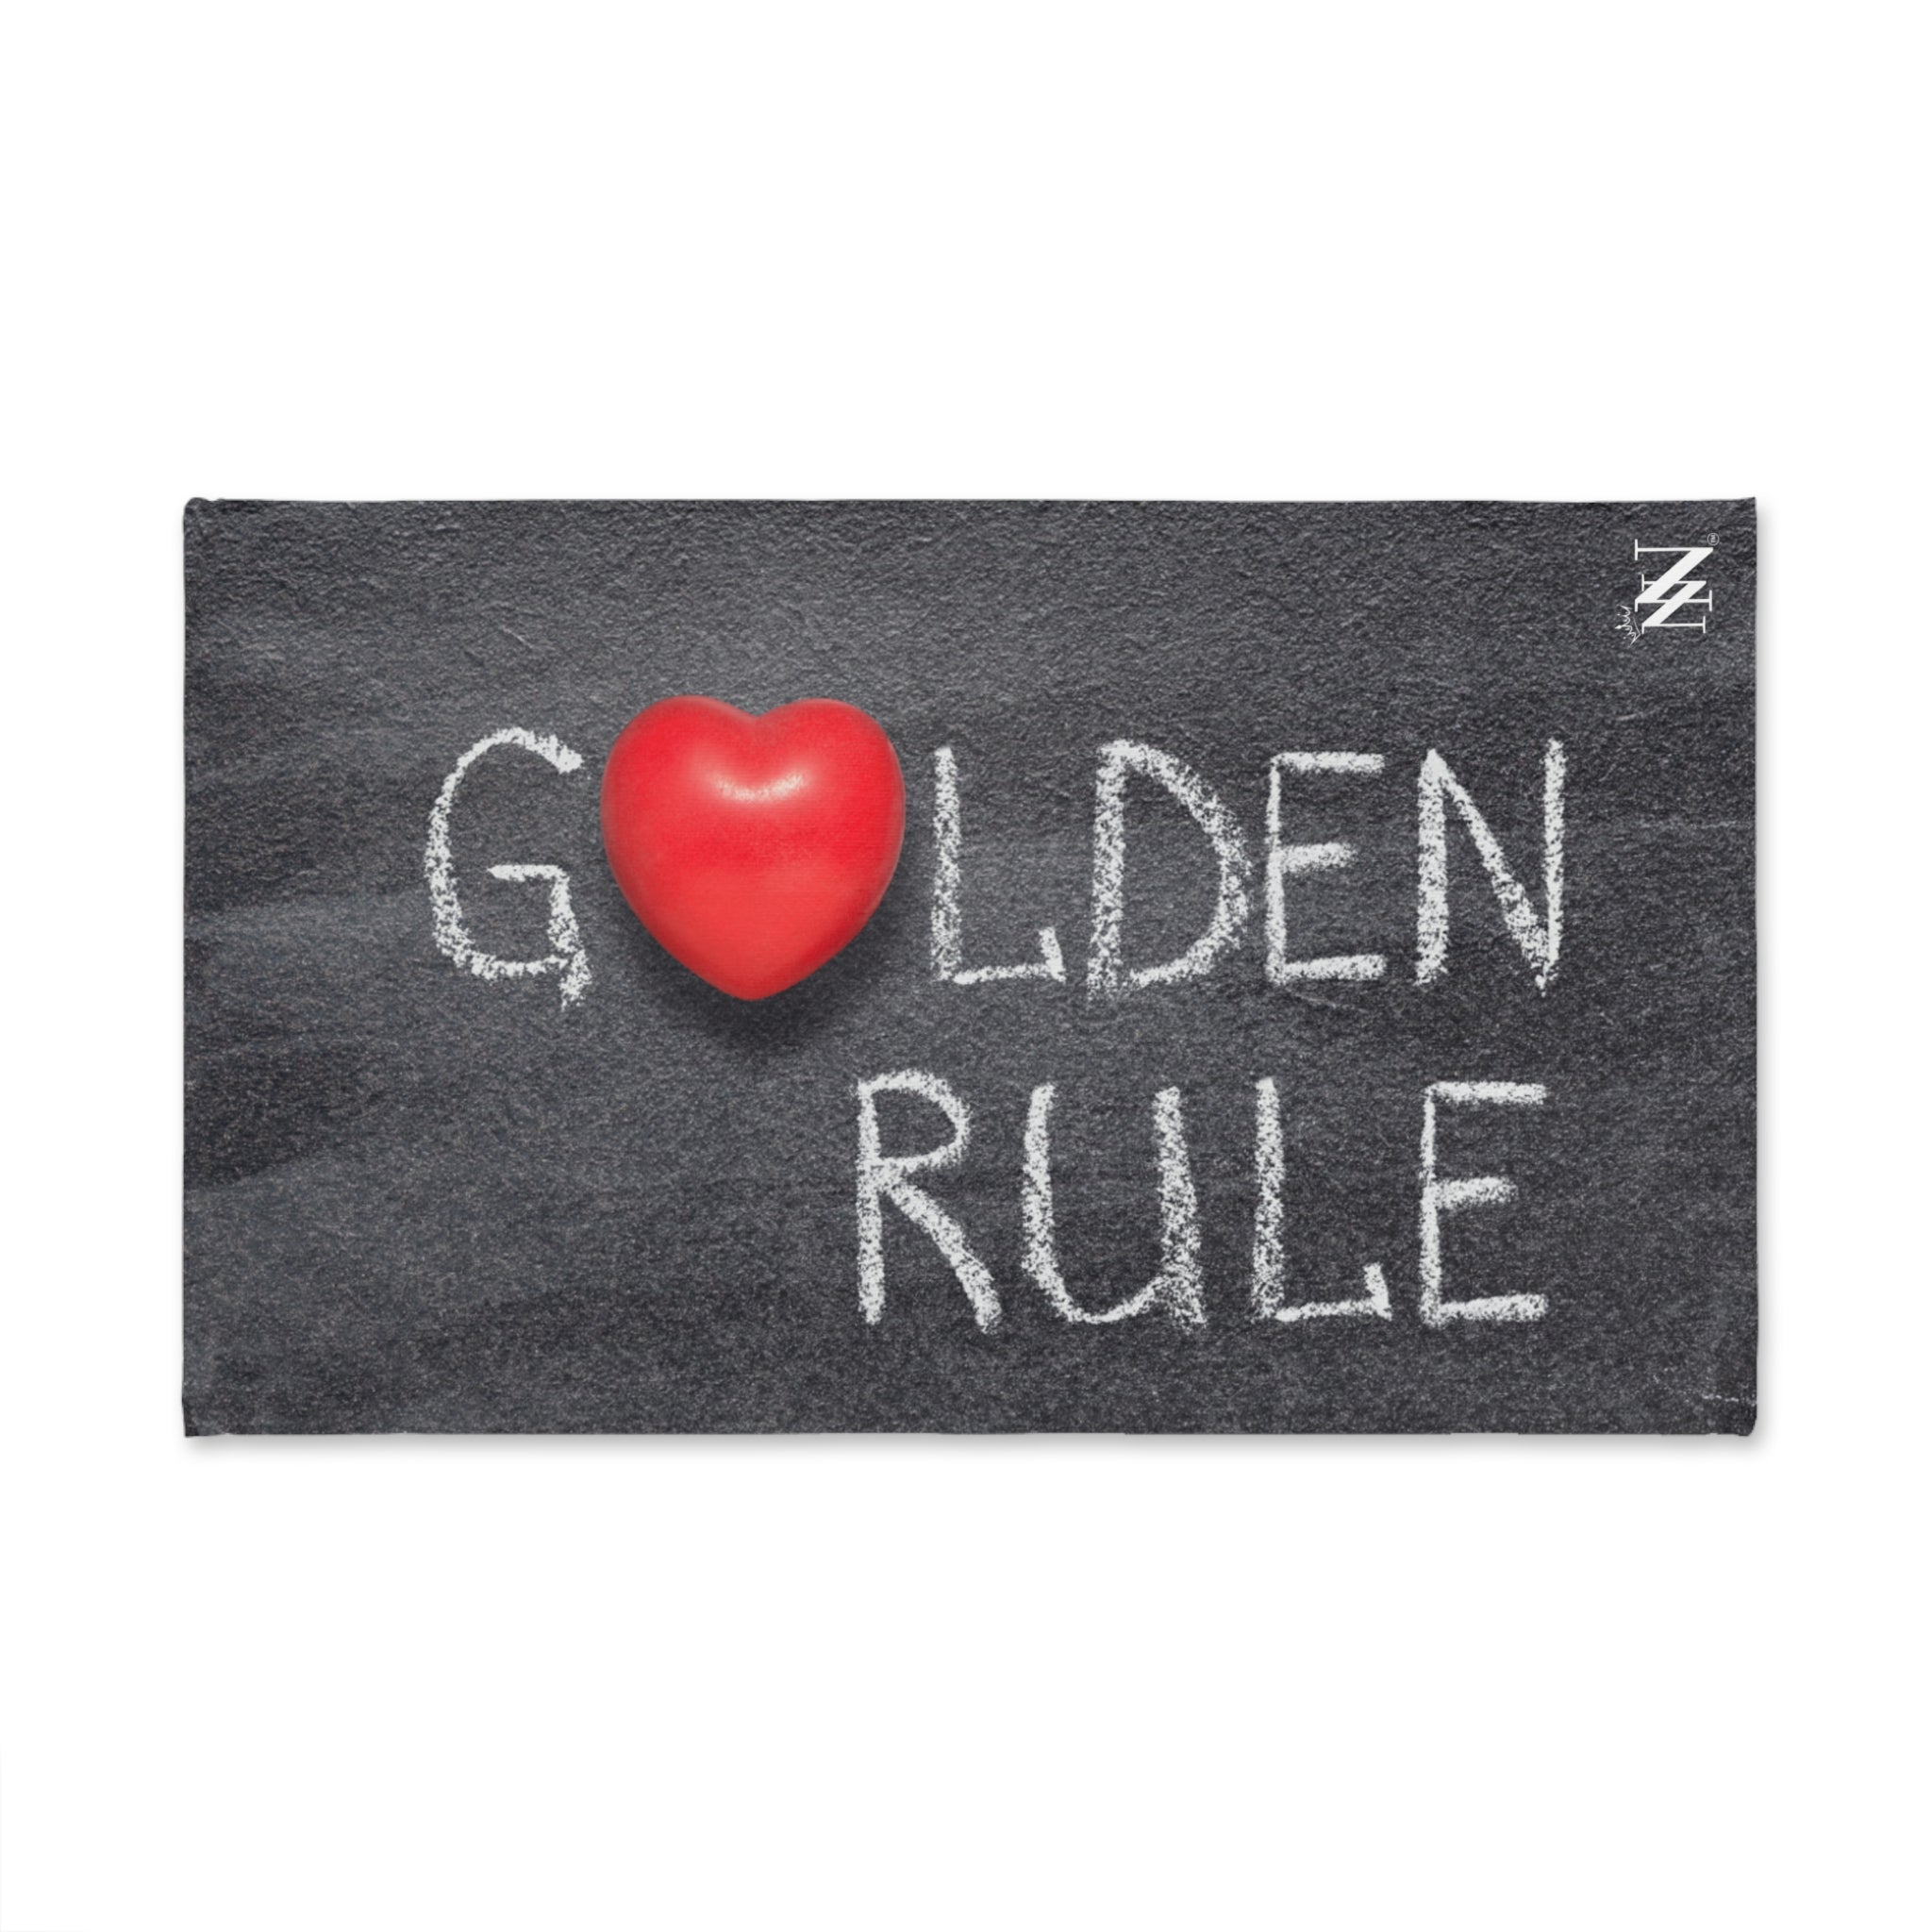 Golden Rule Heart White | Funny Gifts for Men - Gifts for Him - Birthday Gifts for Men, Him, Her, Husband, Boyfriend, Girlfriend, New Couple Gifts, Fathers & Valentines Day Gifts, Christmas Gifts NECTAR NAPKINS